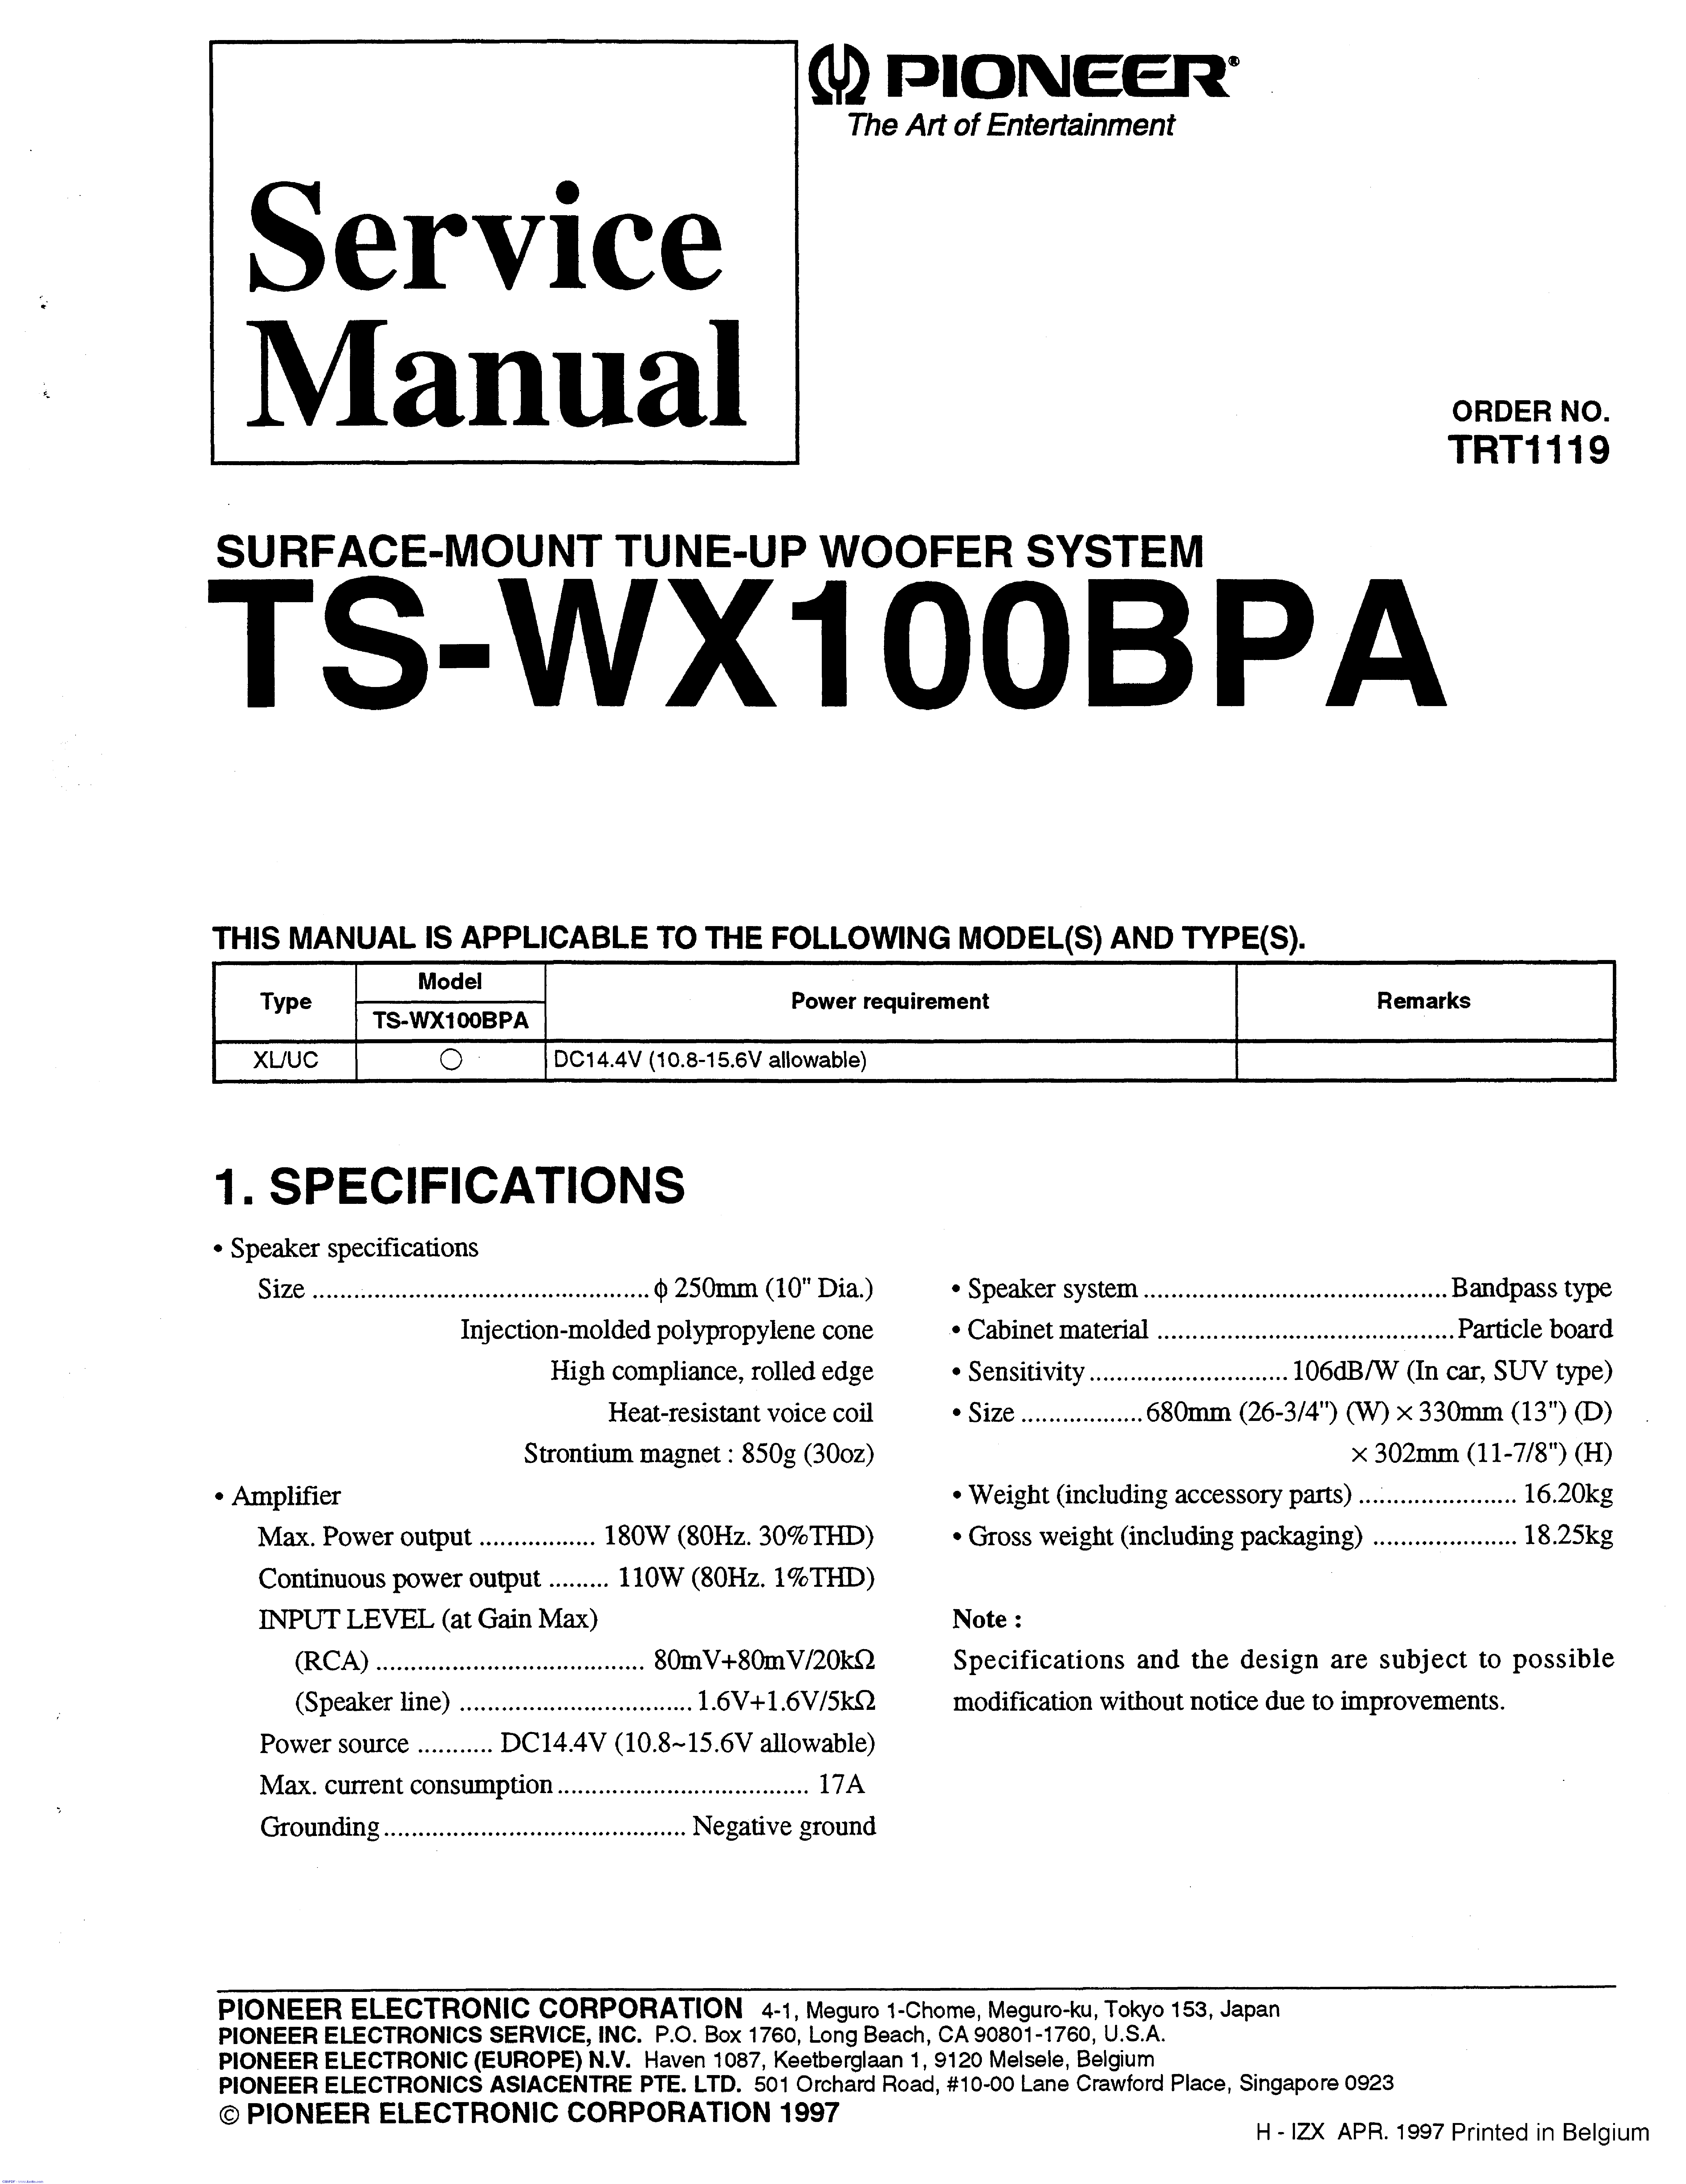 PIONEER TS-WX100 SM service manual (1st page)